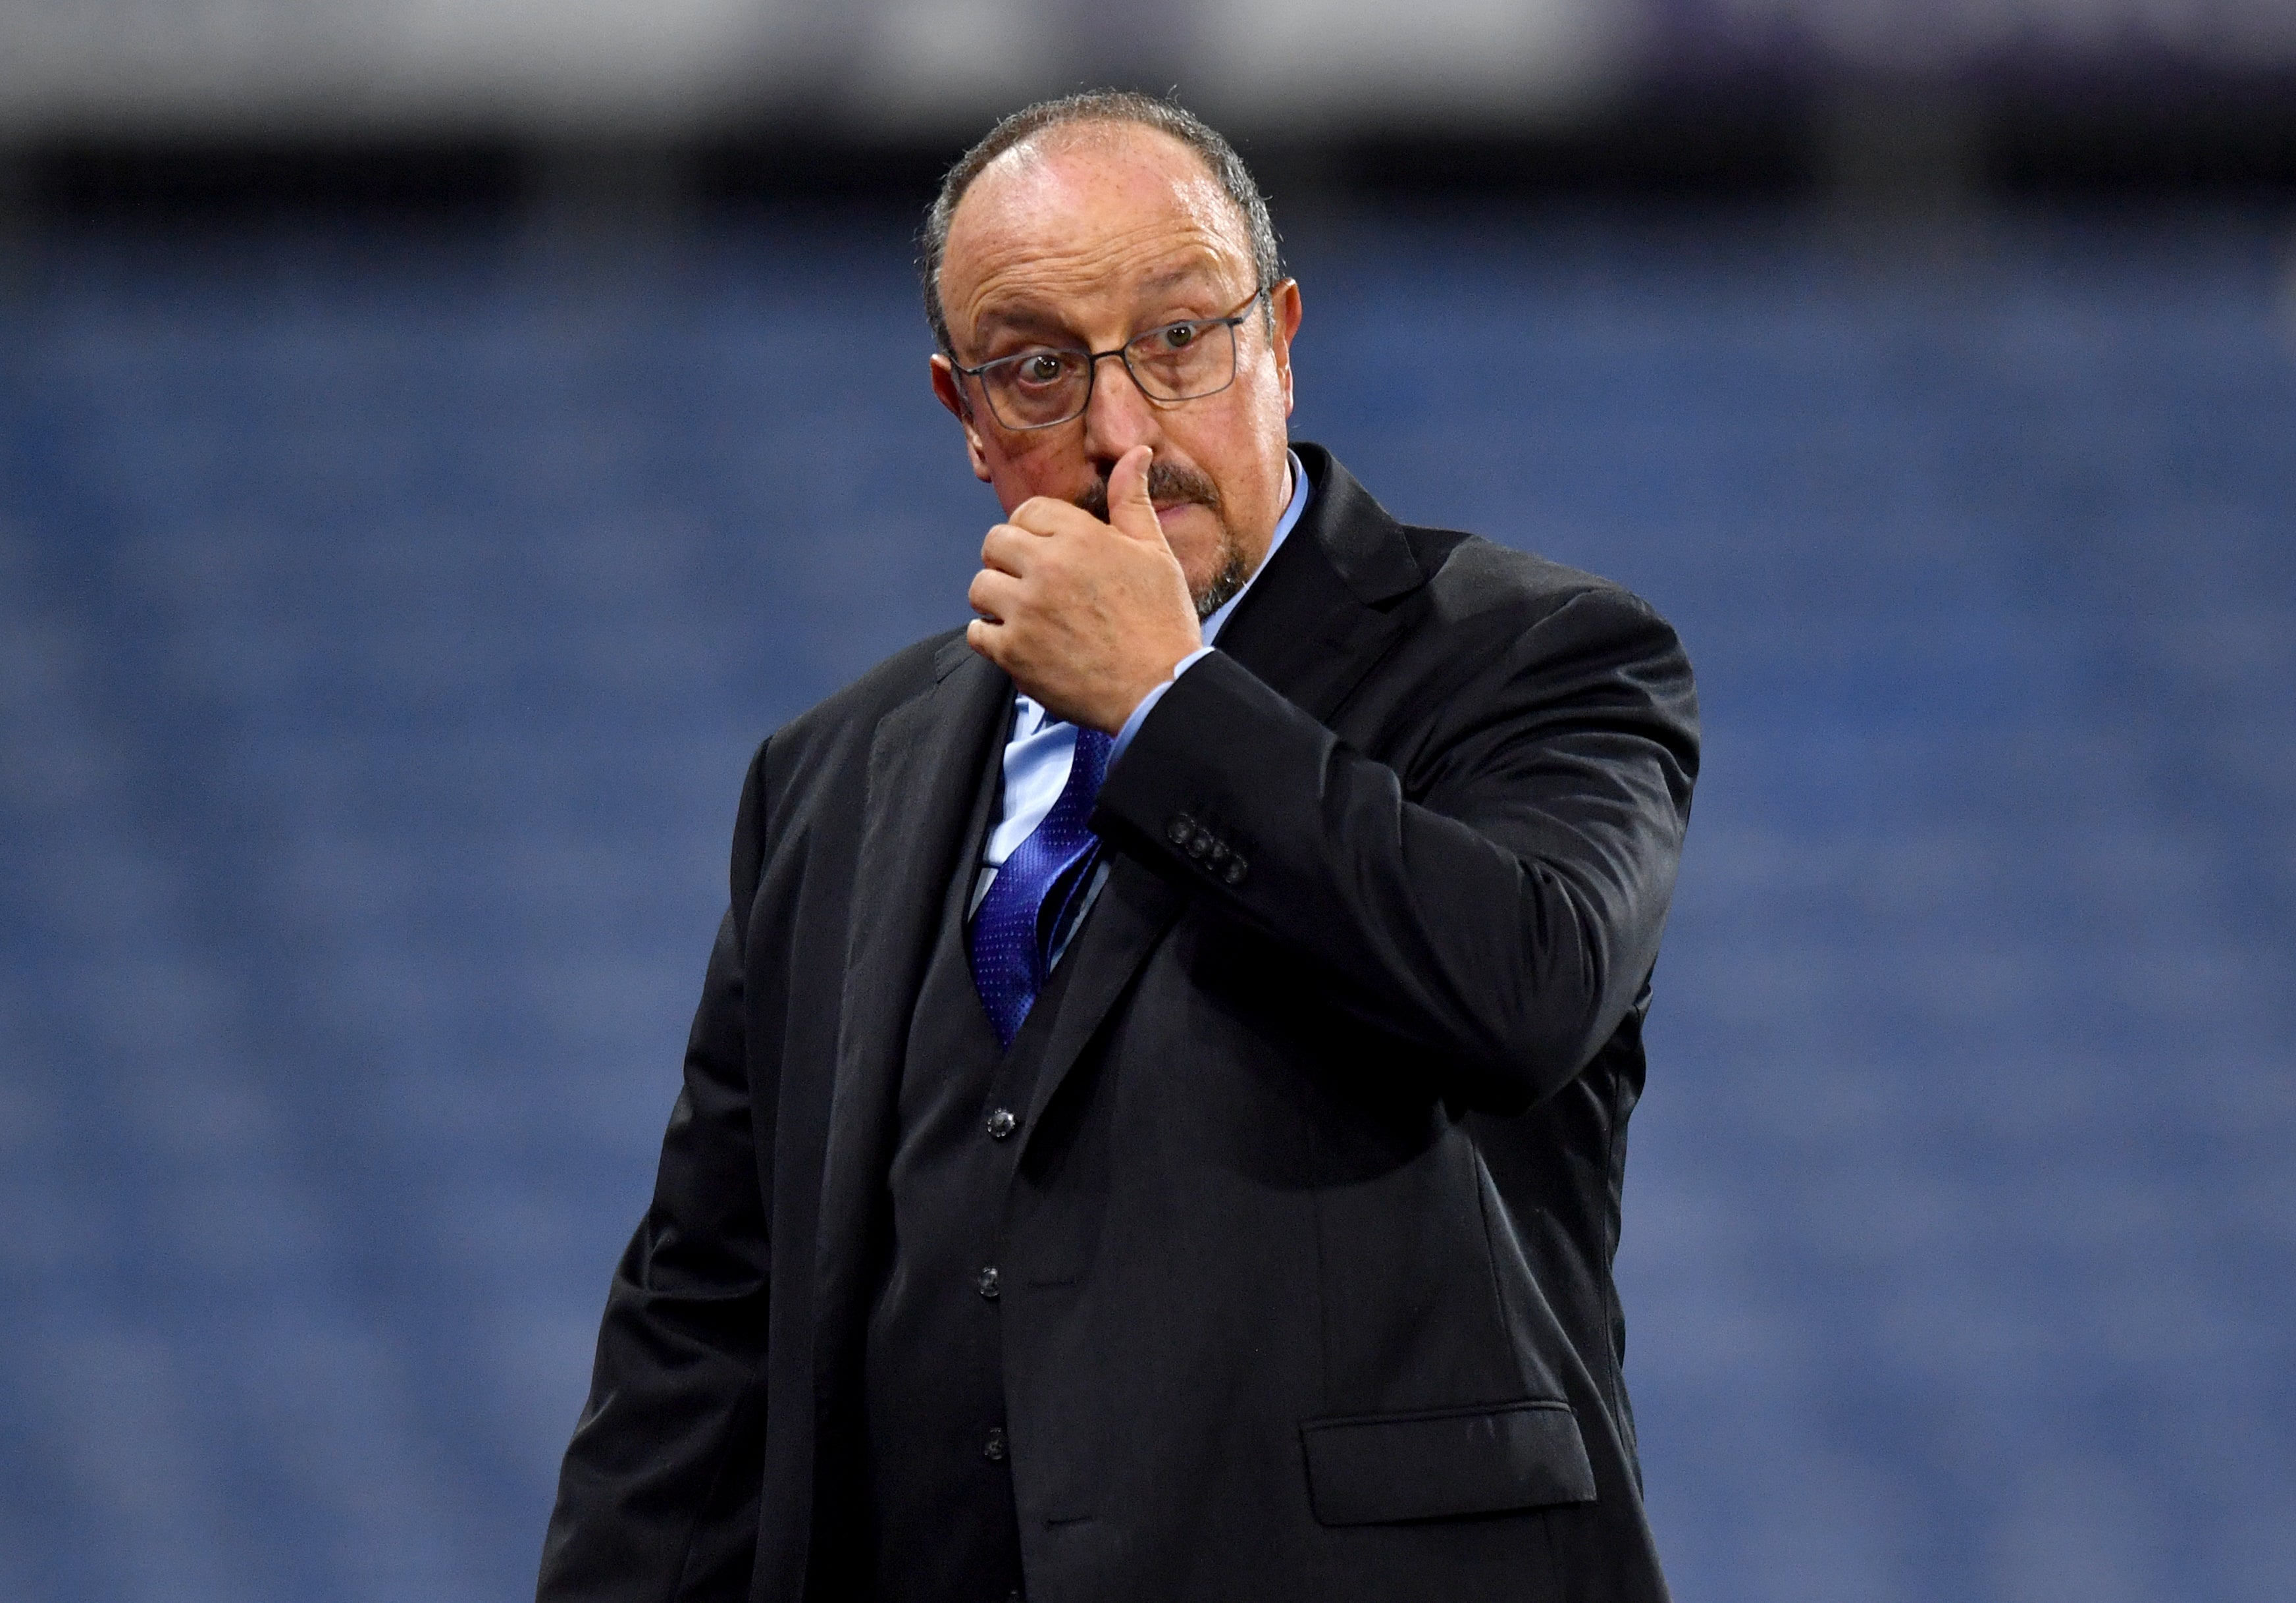 Everton manager Rafael Benitez wishes his side would score earlier to save him stress on the sidelines after they came from behind to beat Burnley 3-1 (Martin Rickett/PA)